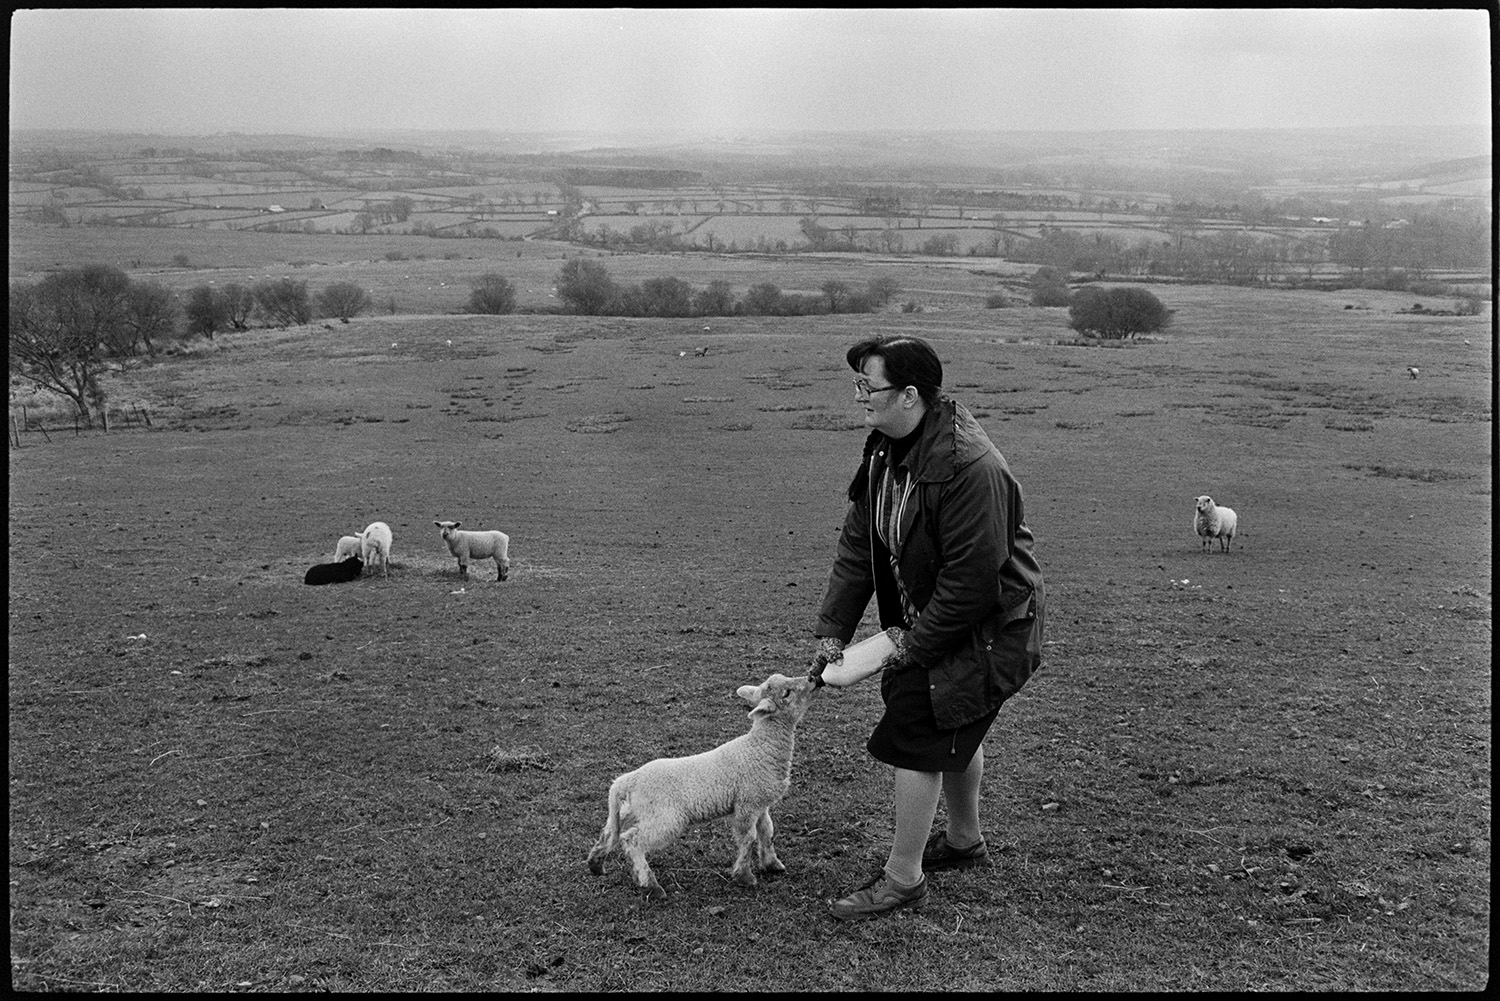 Television crew filming the photographer working on moor.
[A woman feeding a lamb with a bottle in a field at Hatherleigh Moor. Views of fields and hills can be seen in the distance.]